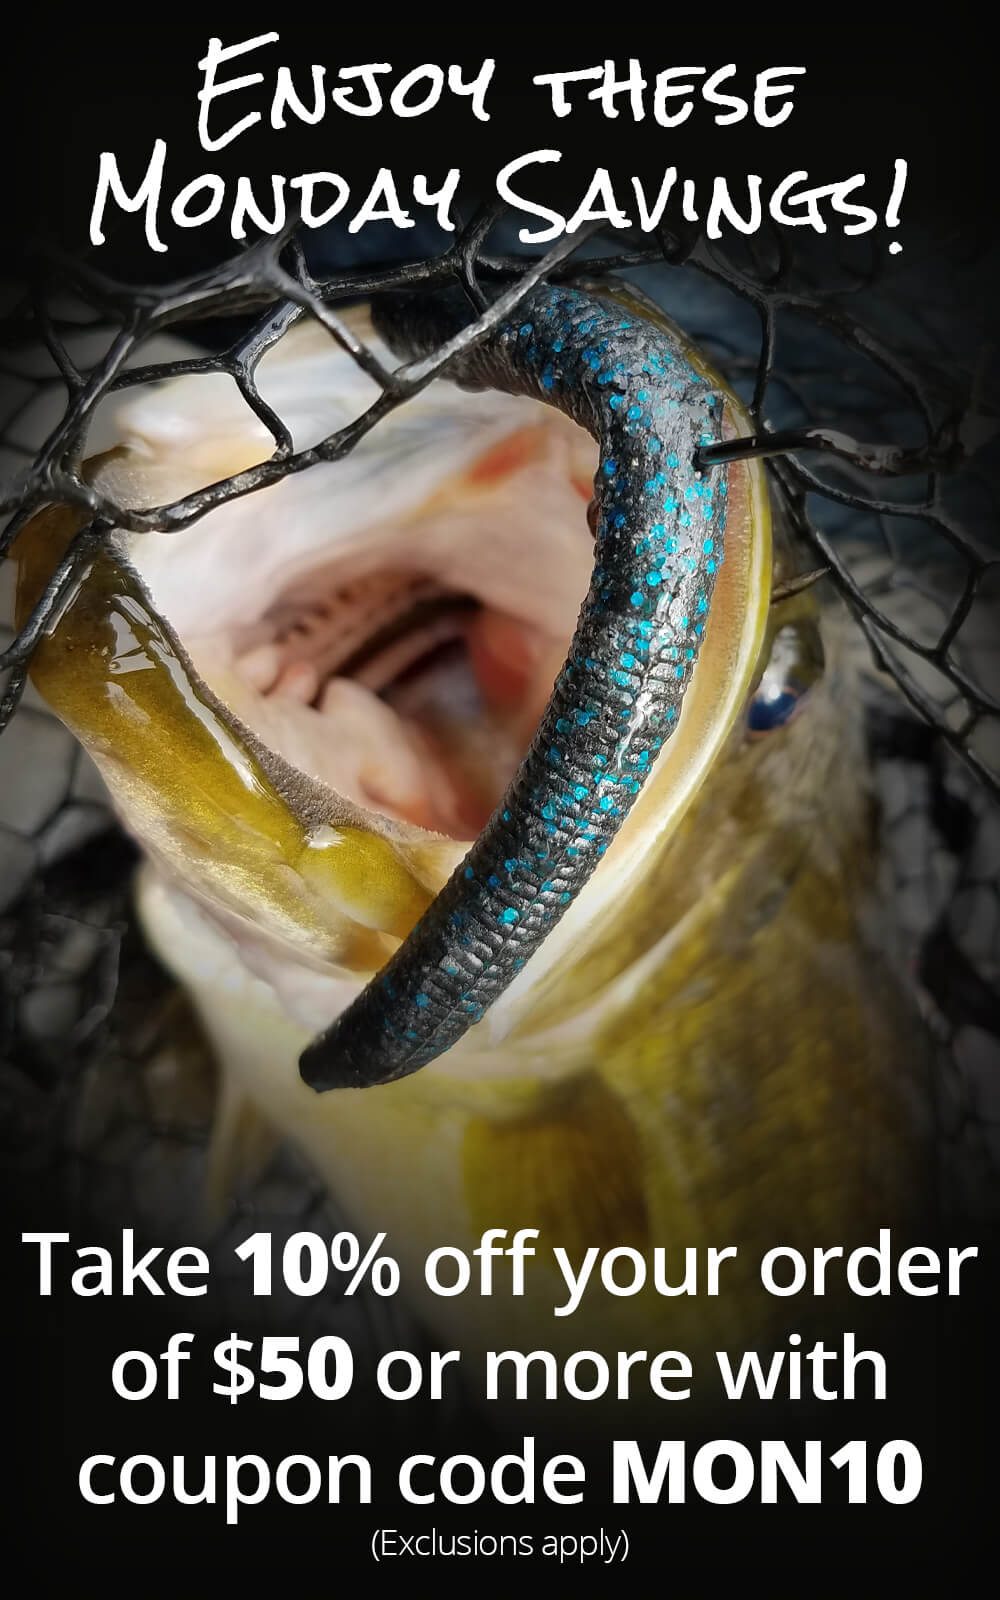 Take 10% off your order of $50 or more with coupon code: MON10